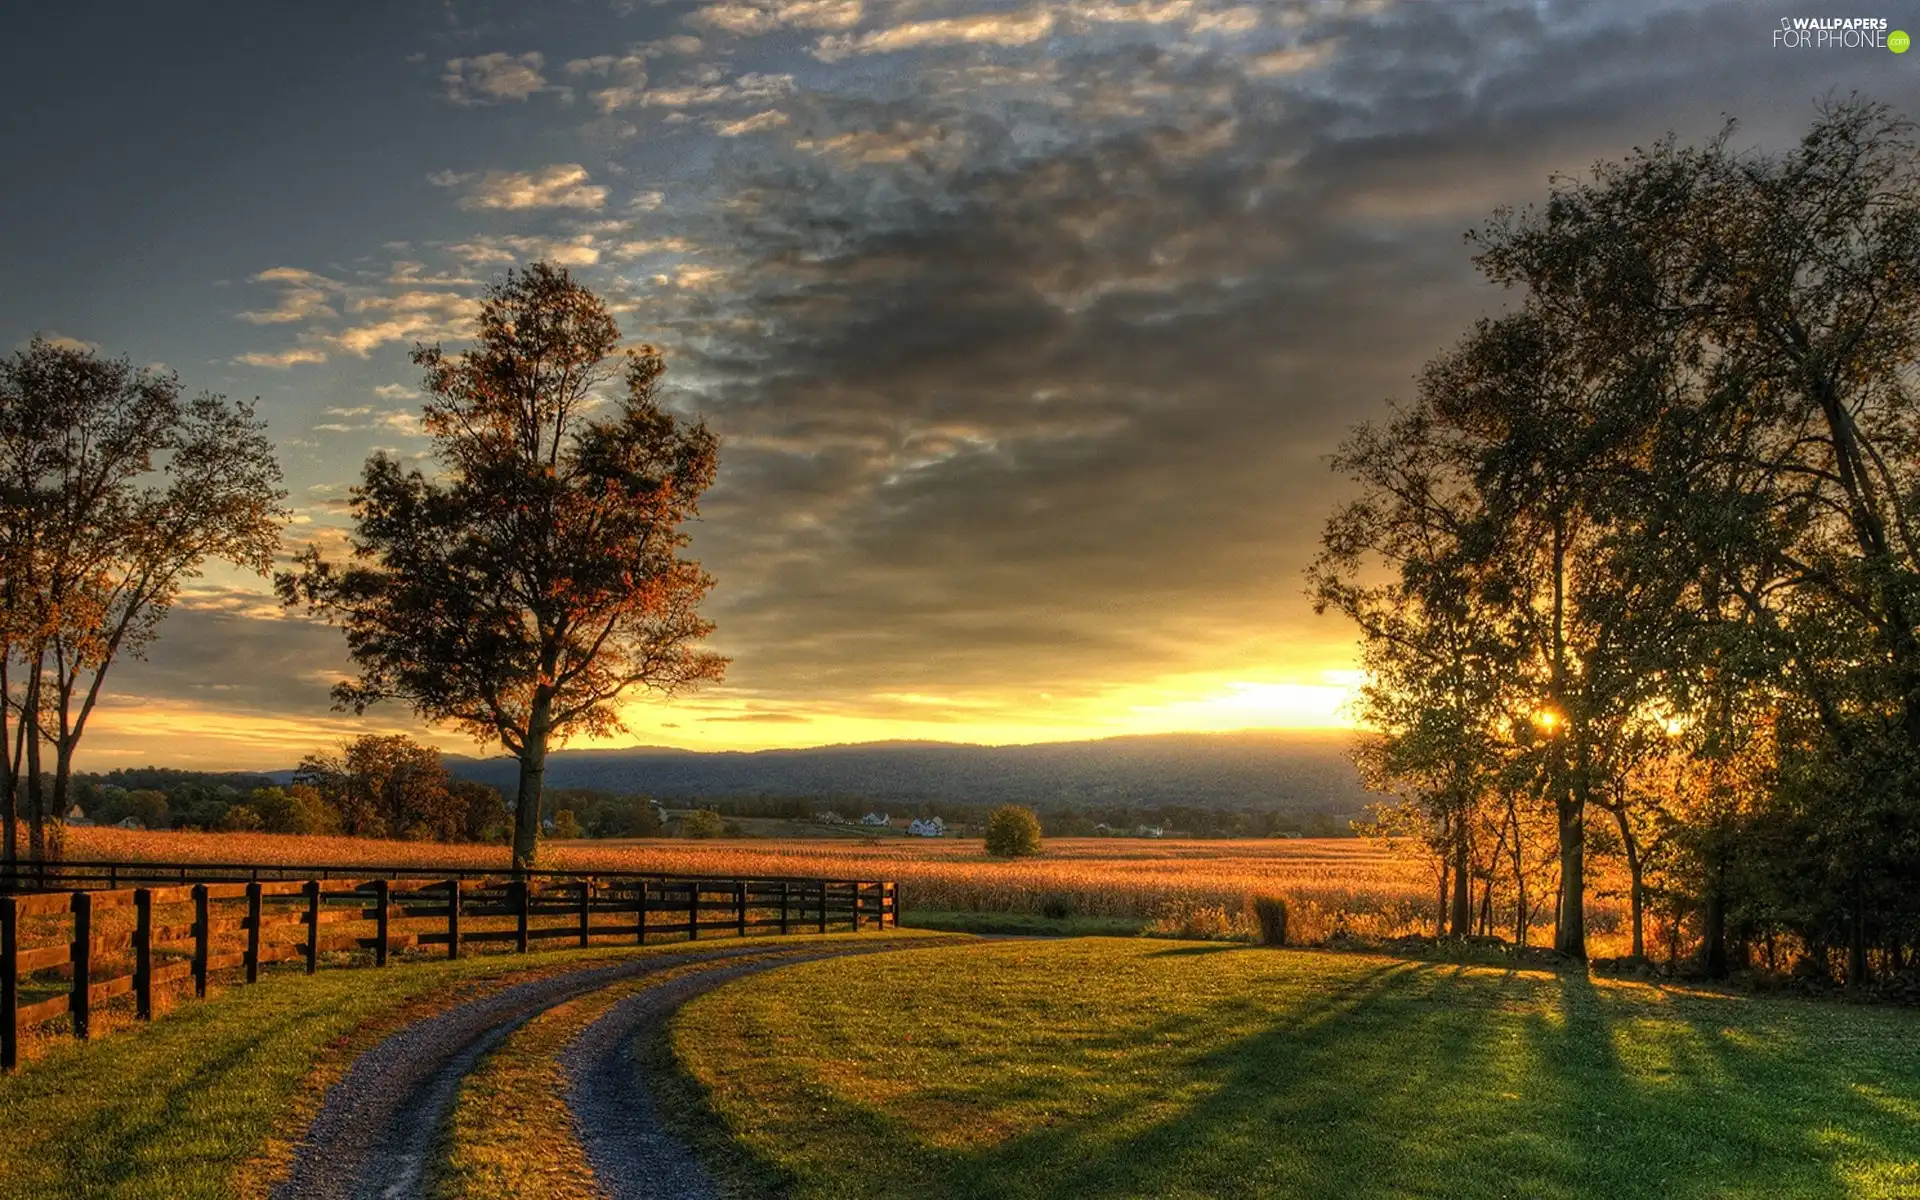 viewes, Great Sunsets, fence, trees, Way